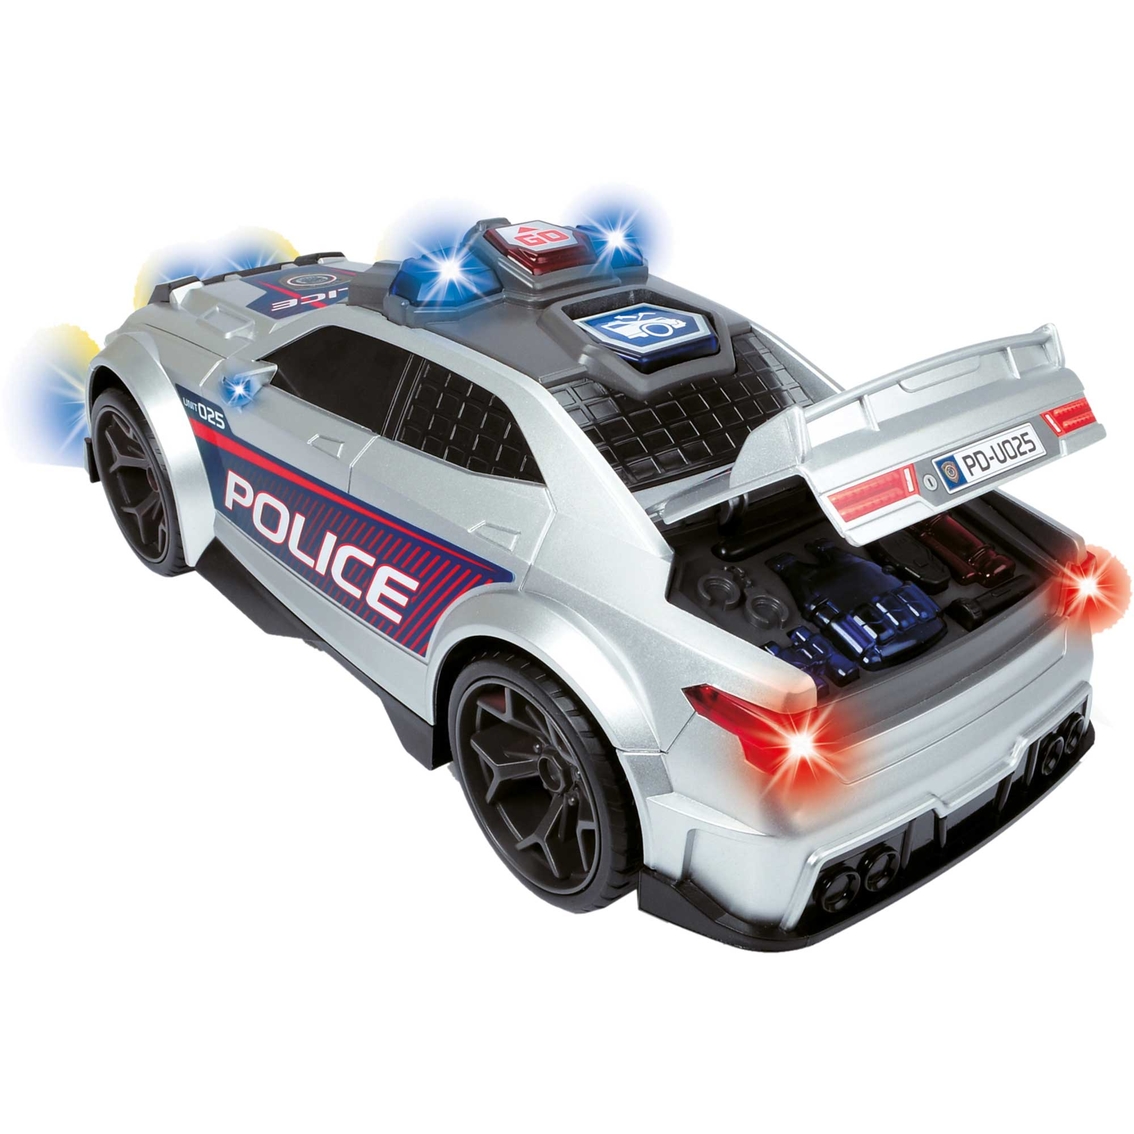 Dickie Toys Street Force with Light and Sound - Image 2 of 3